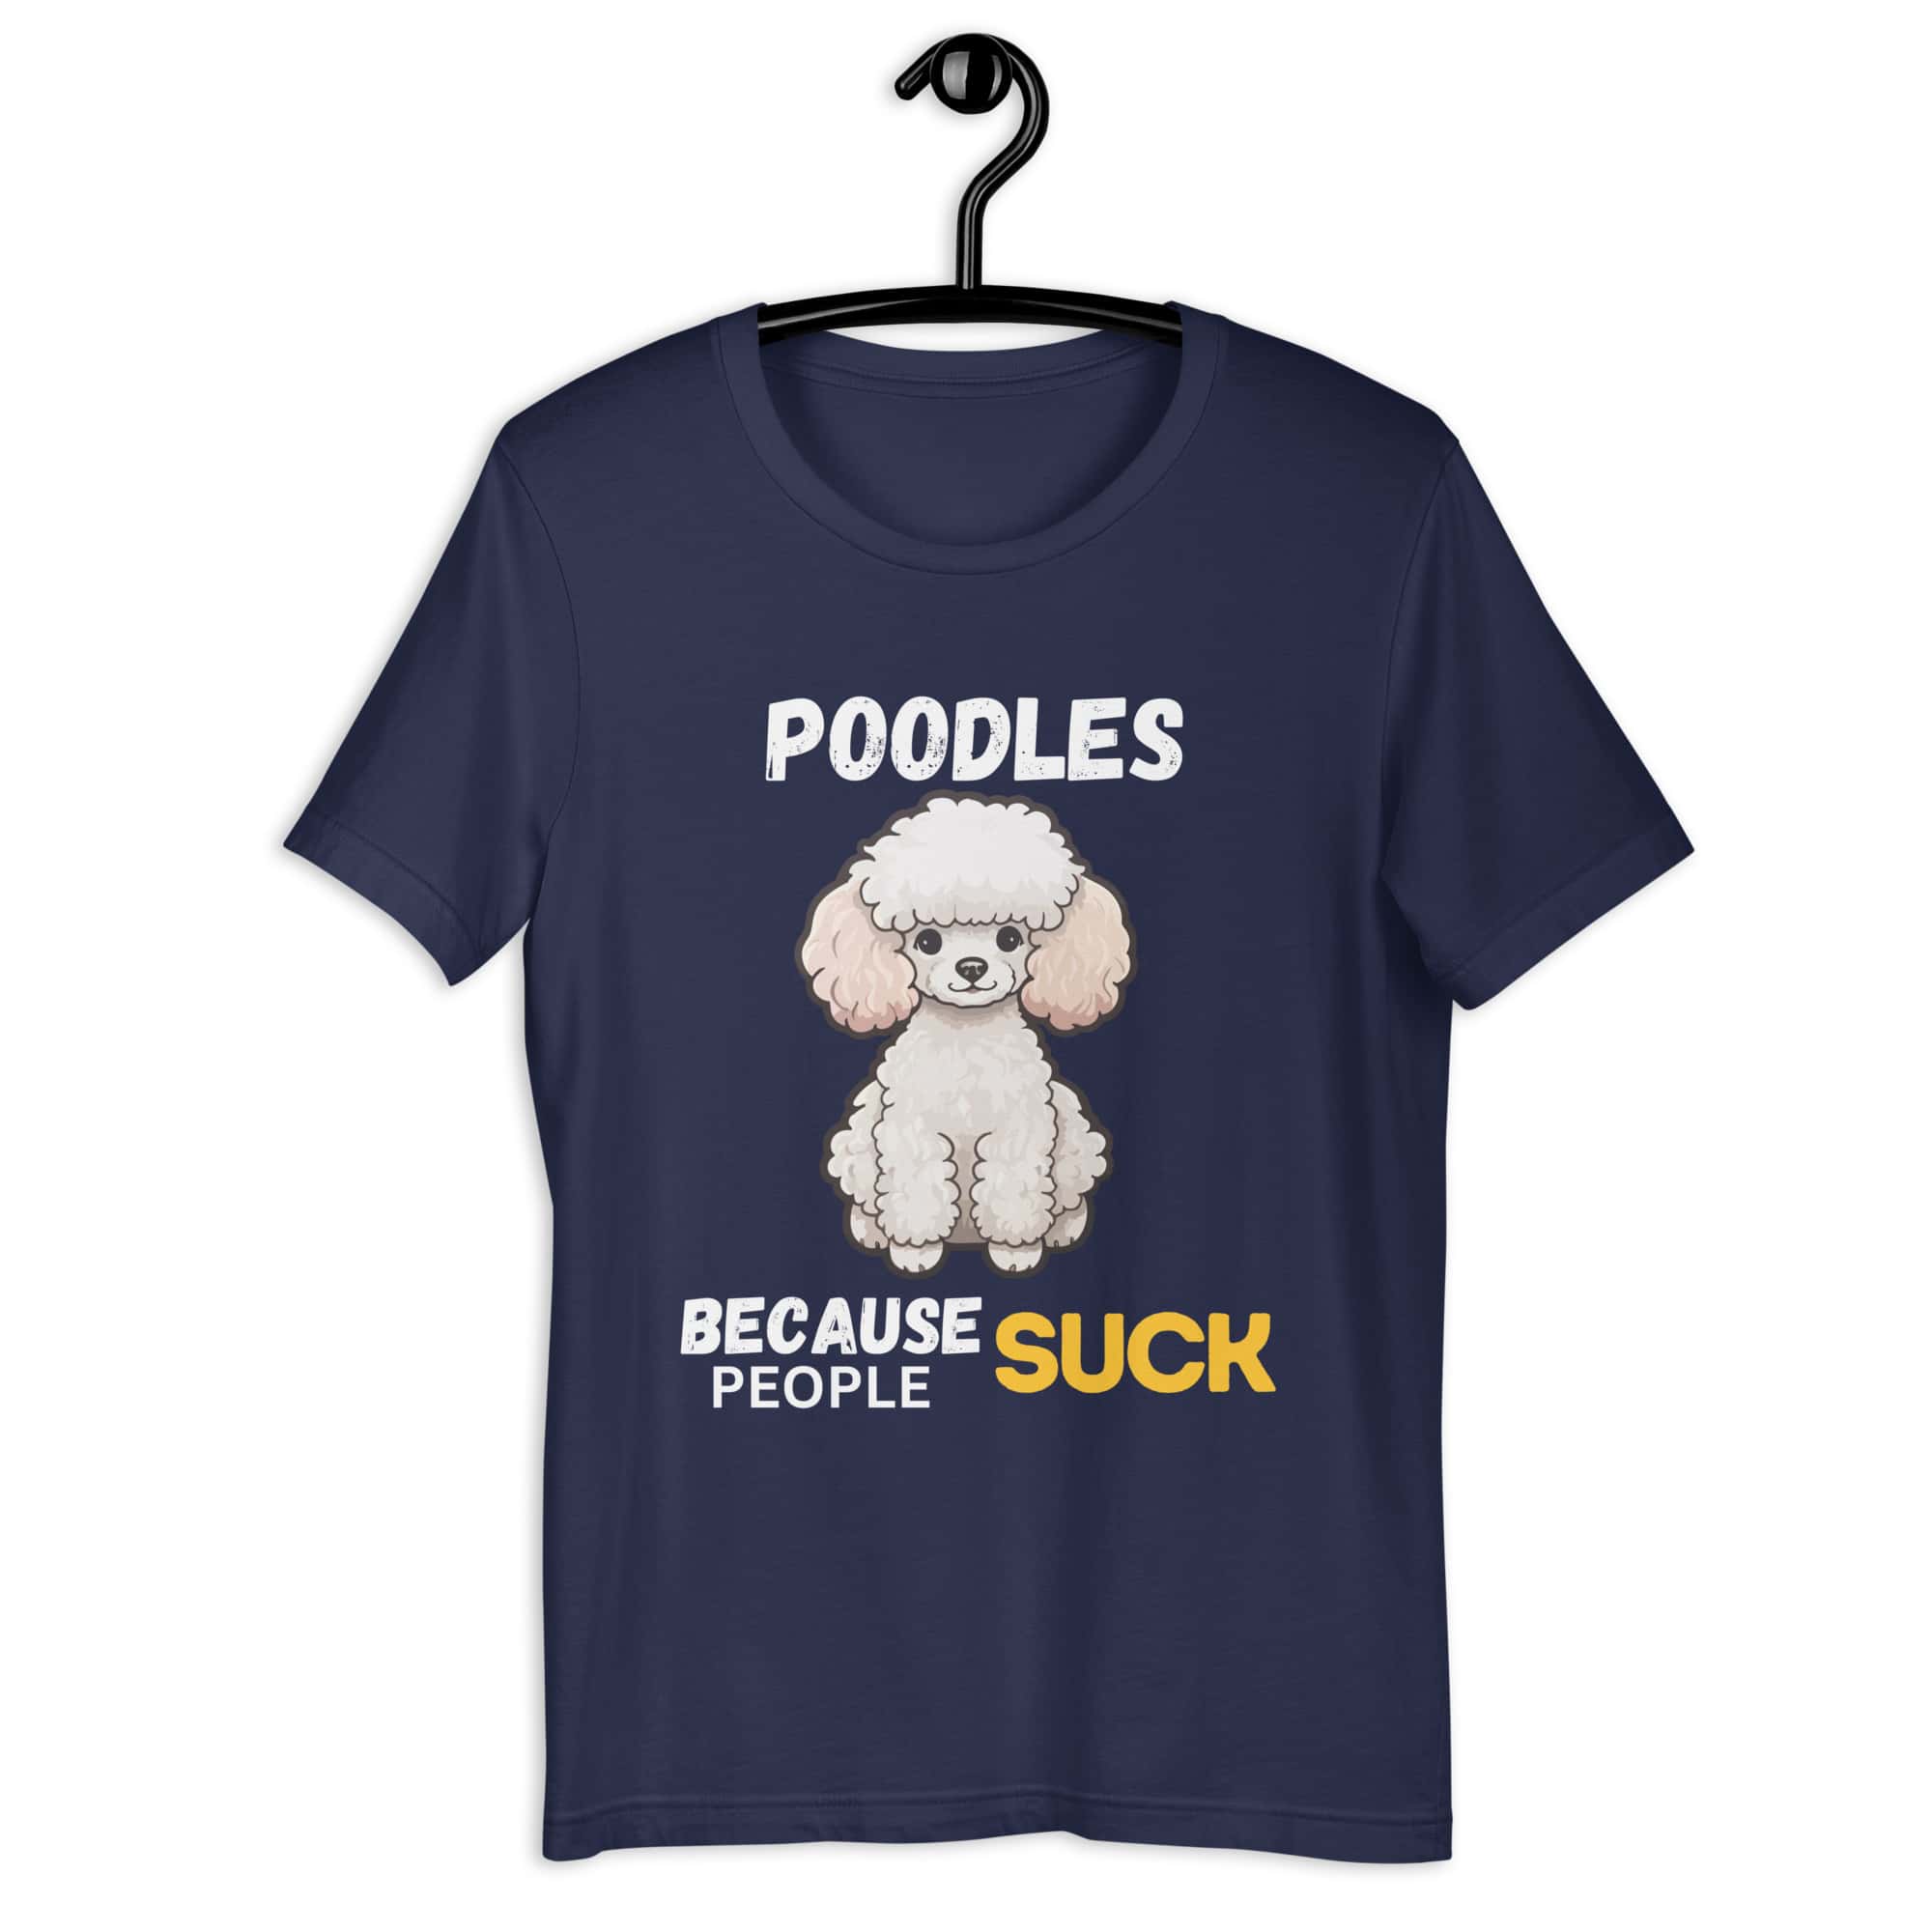 Poodles Because People Suck Unisex T-Shirt navy